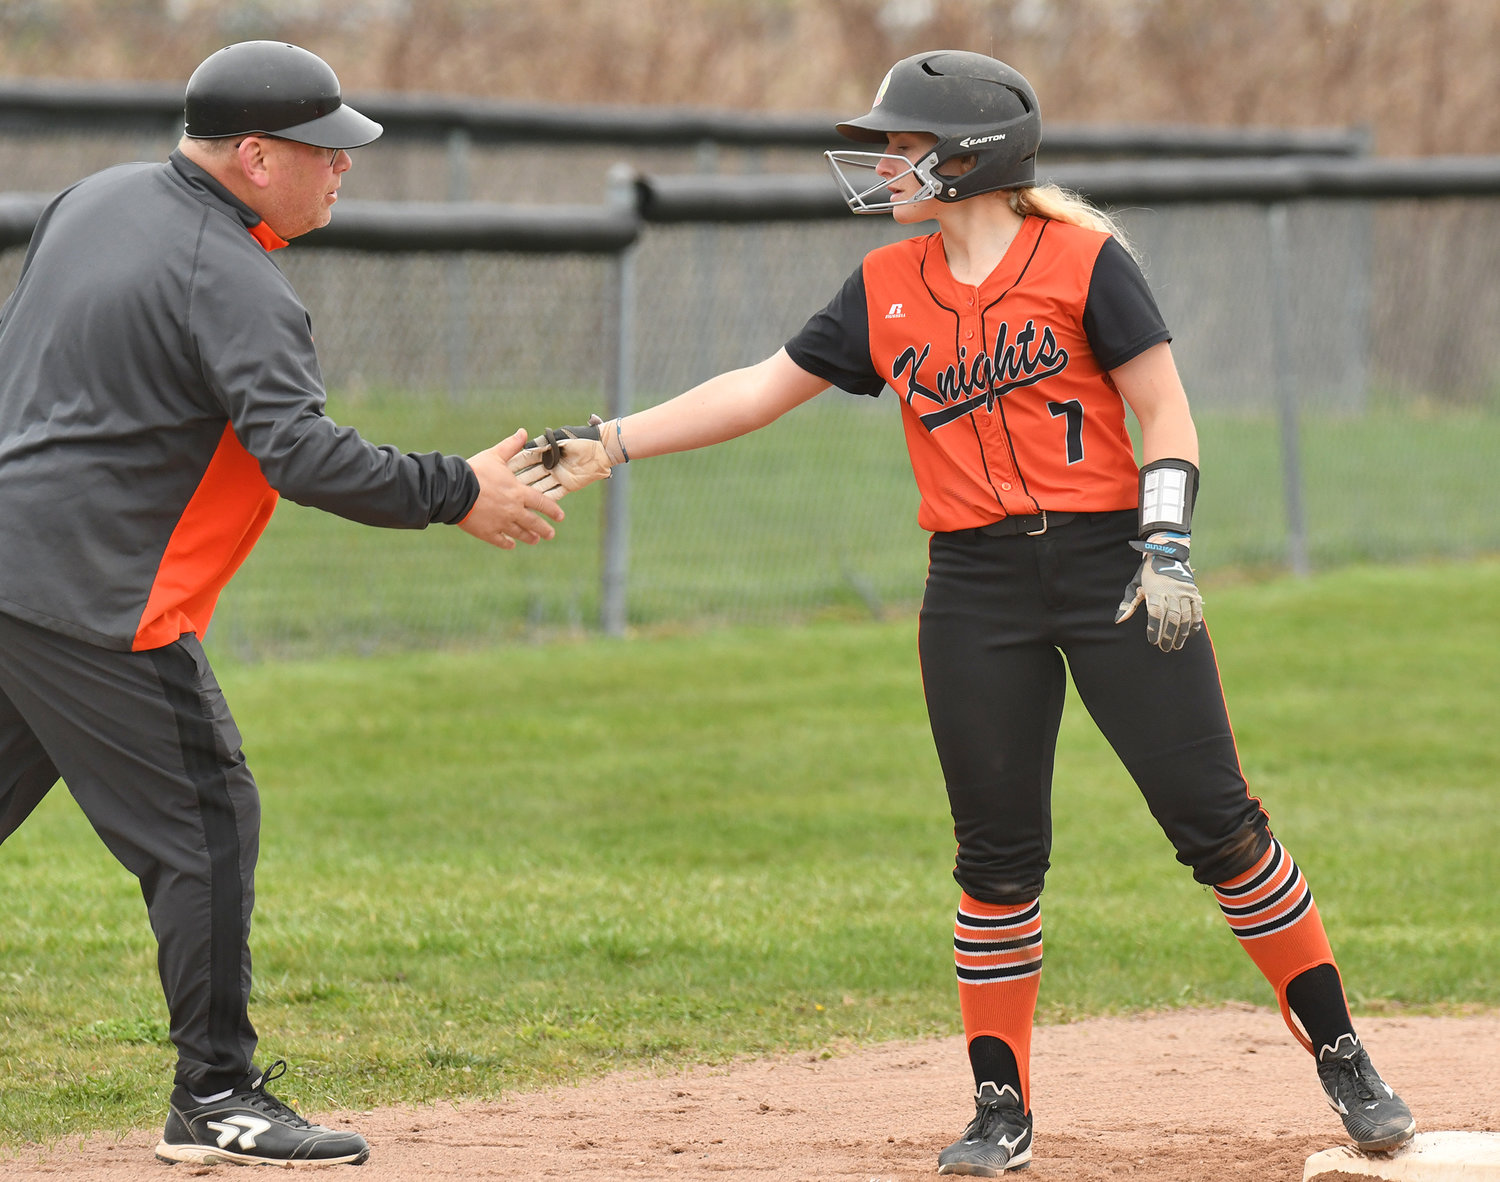 SMASH HIT — Rome Free Academy baserunner Lauren Dorfman gets congratulations from head coach Jerry Closinski after hitting a triple in the first game of the team's doubleheader sweep at home at Kost Field over Utica Proctor. Dorfman singled twice, doubled, tripled and scored four runs.